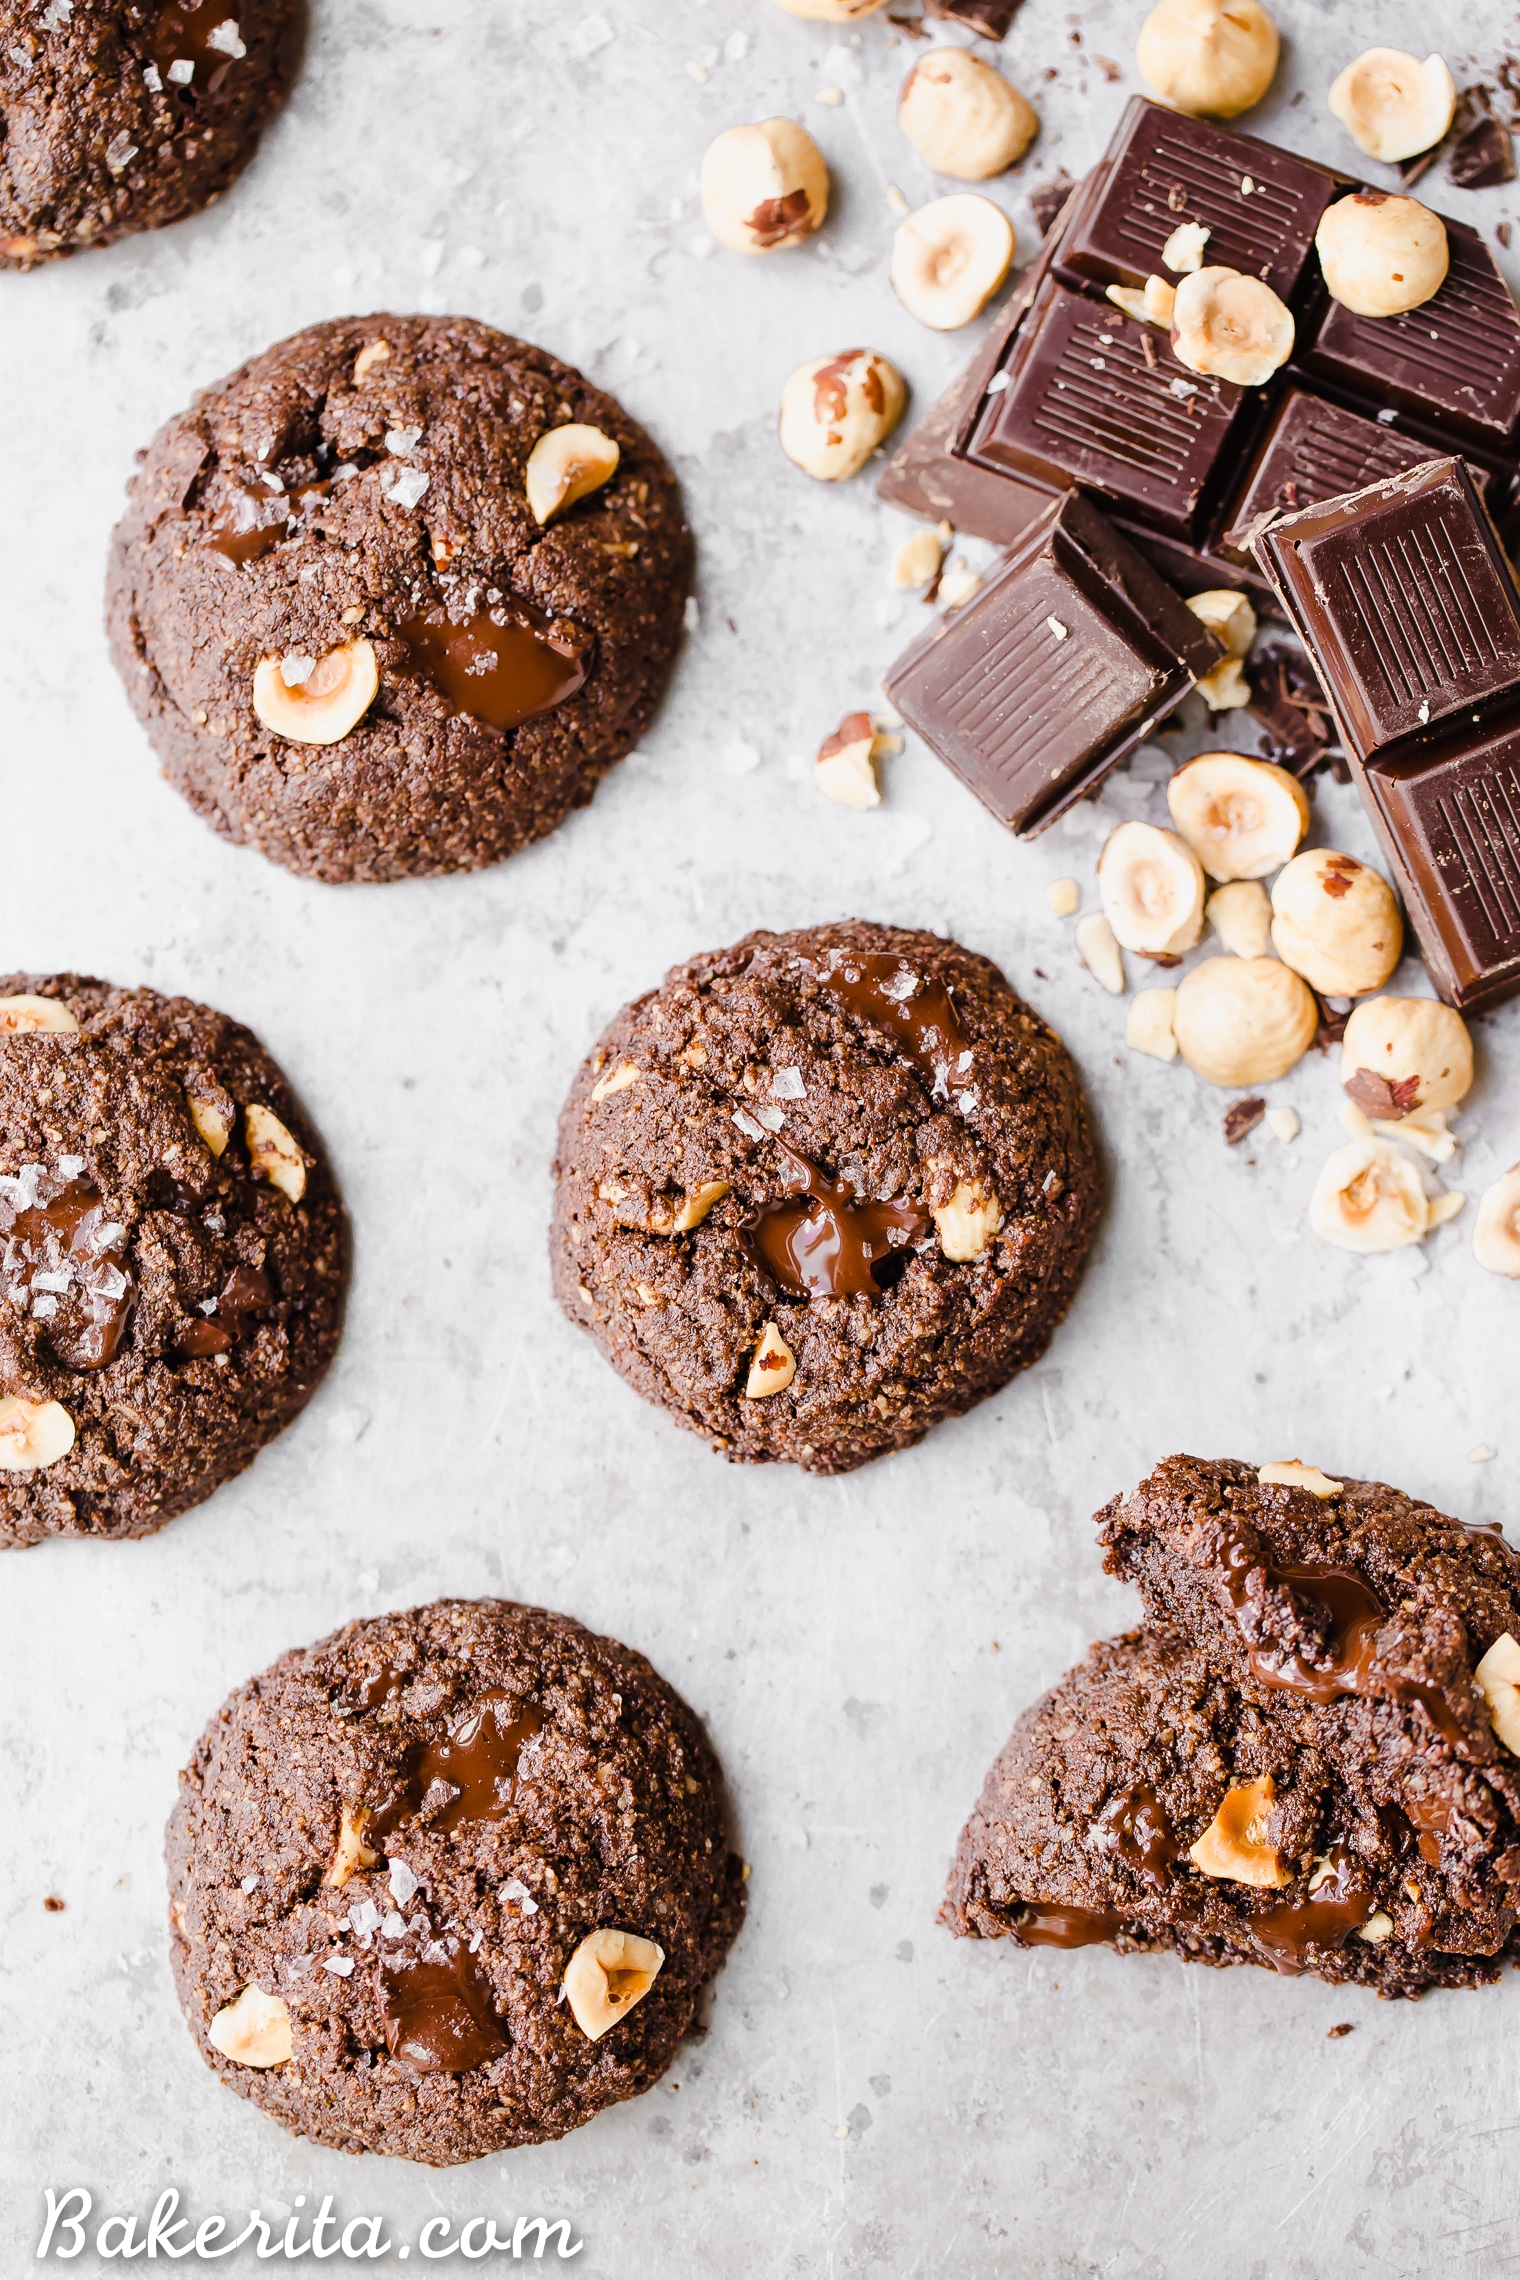 These Double Chocolate Hazelnut Cookies are soft, fudgy, and incredibly chocolatey! These irresistible cookies are loaded with melty dark chocolate chunks and crunchy hazelnuts, and you'd never guess they're gluten-free, paleo, and vegan.